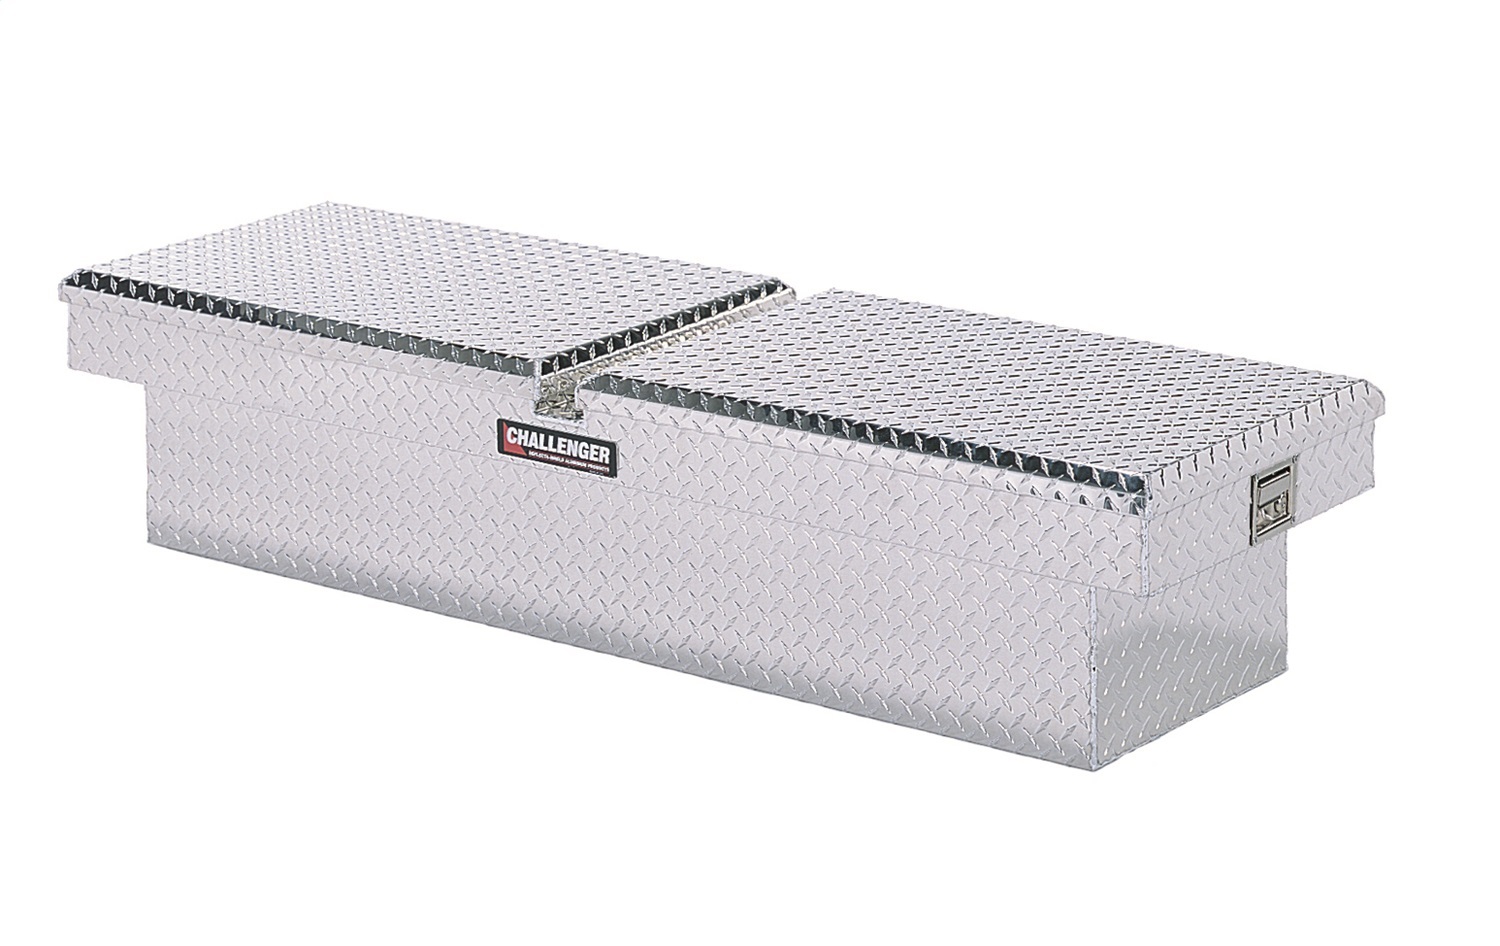 Deflecta-Shield Aluminum Deflecta-Shield Aluminum 5150 Challenger; Gull Wing Crossover Storage Box